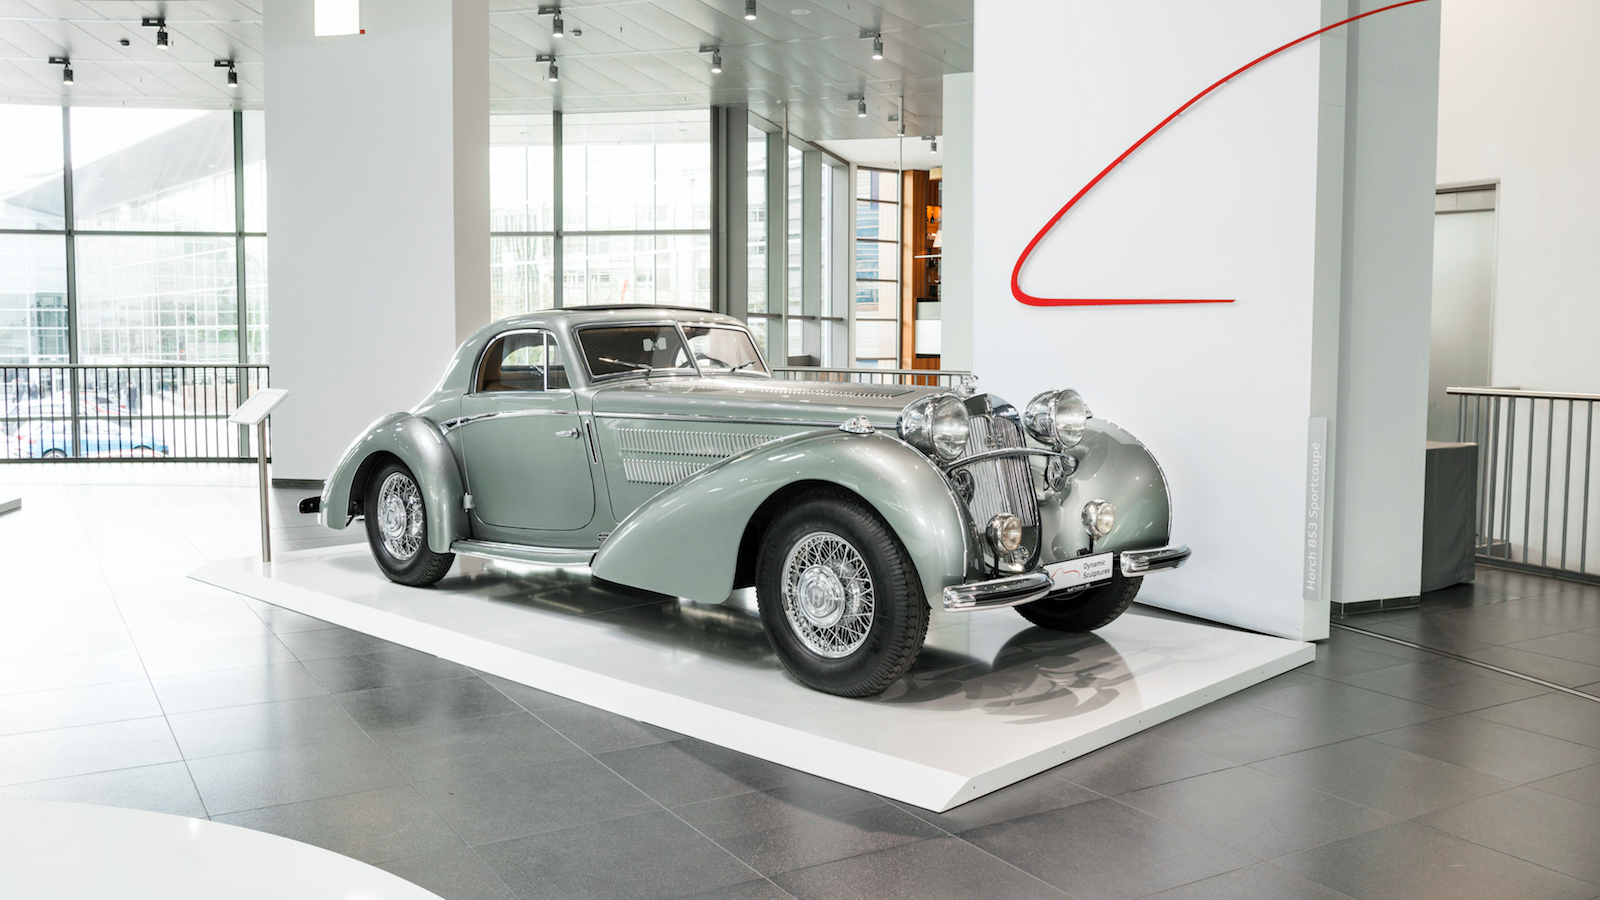 In pictures: inside the Audi Museum in Ingolstadt